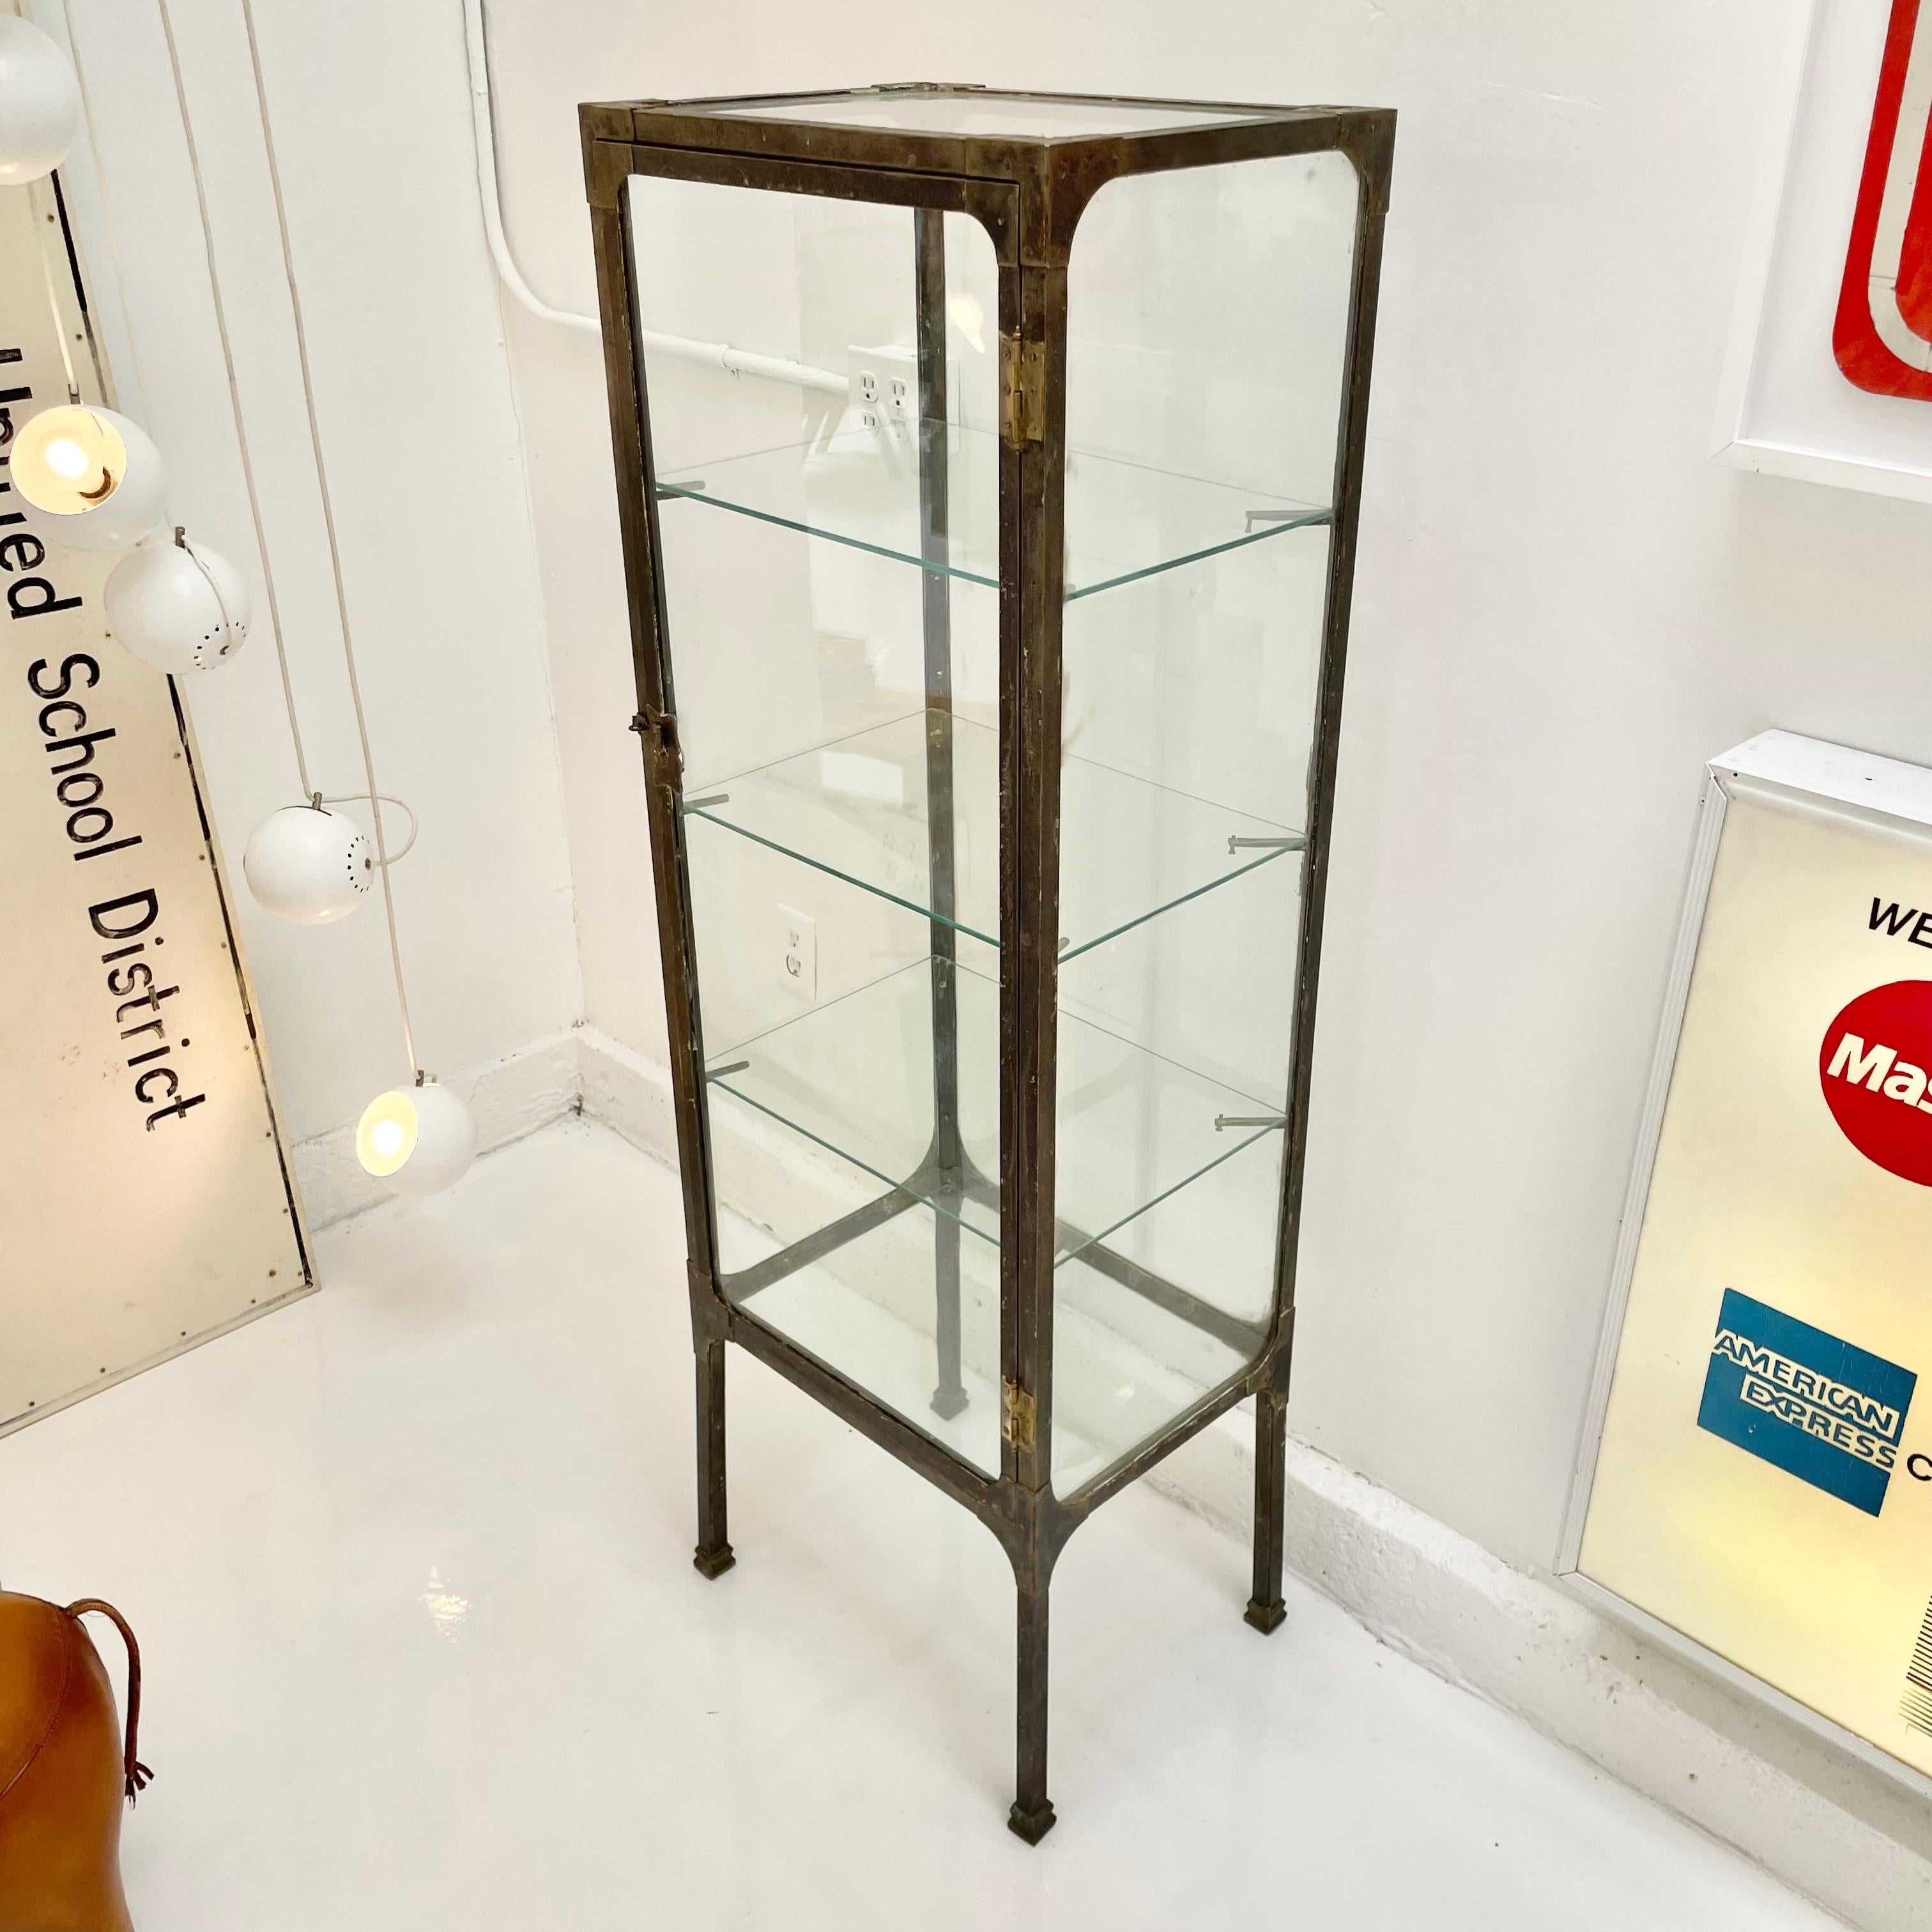 Slender Art Deco vitrine made in the 1920s in Buenos Aires, Argentina. Rectangular frame sitting atop tapered legs. Original glass frame with rare glass top and bottom. Three glass shelves. Vintage clasp sold with vintage padlock. Fantastic display